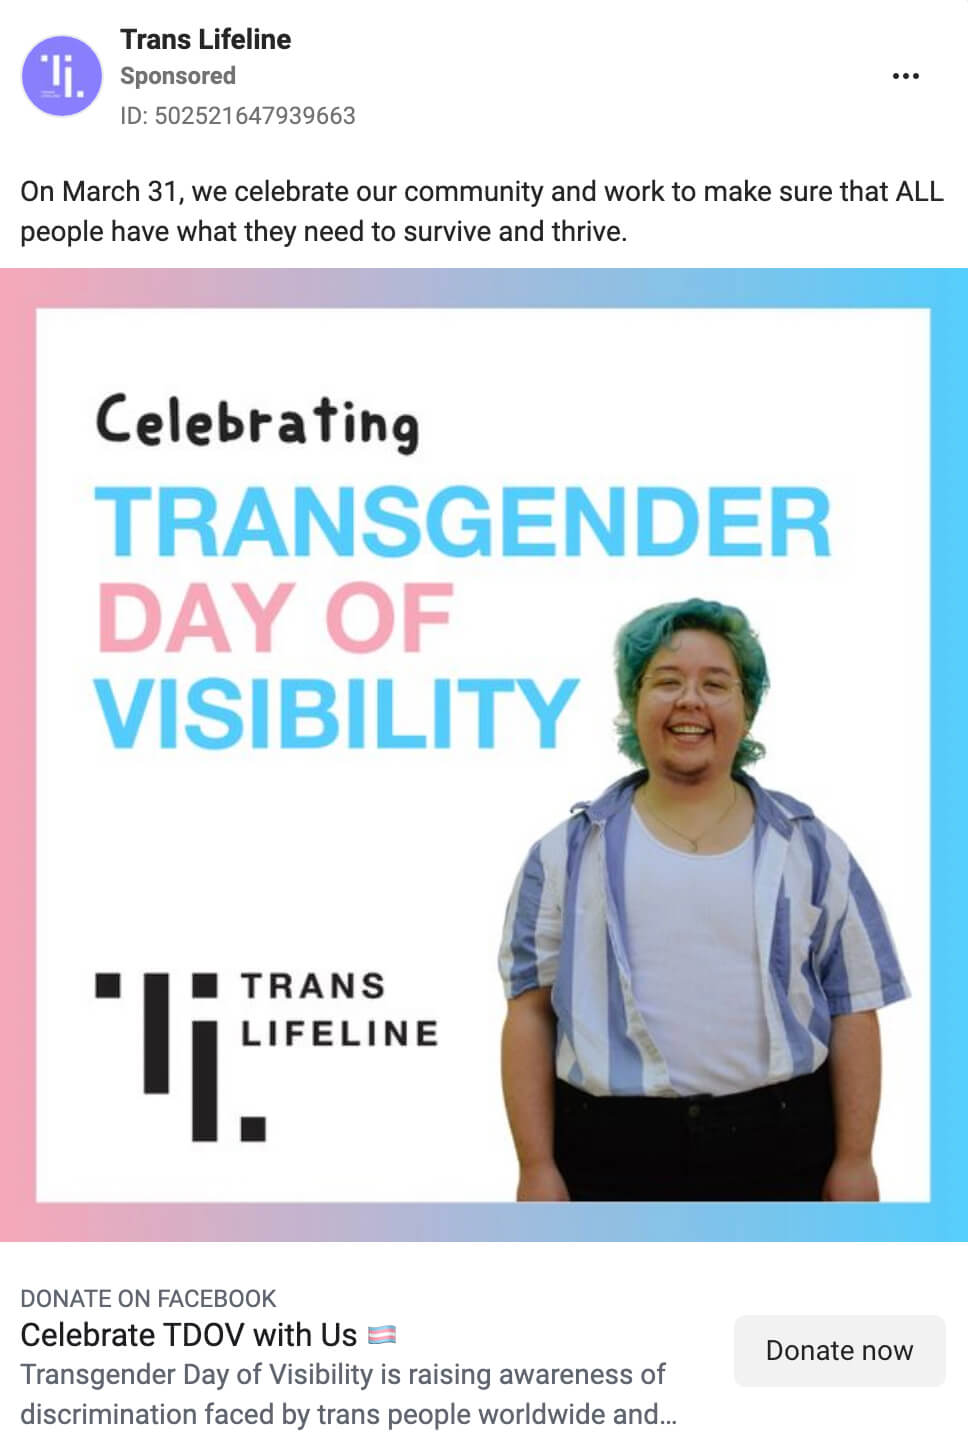 what-happens-when-your-facebook-ad-copy-uses-prohibited-words-gender-identities-inclusive-language-trans-lifeline-example-4